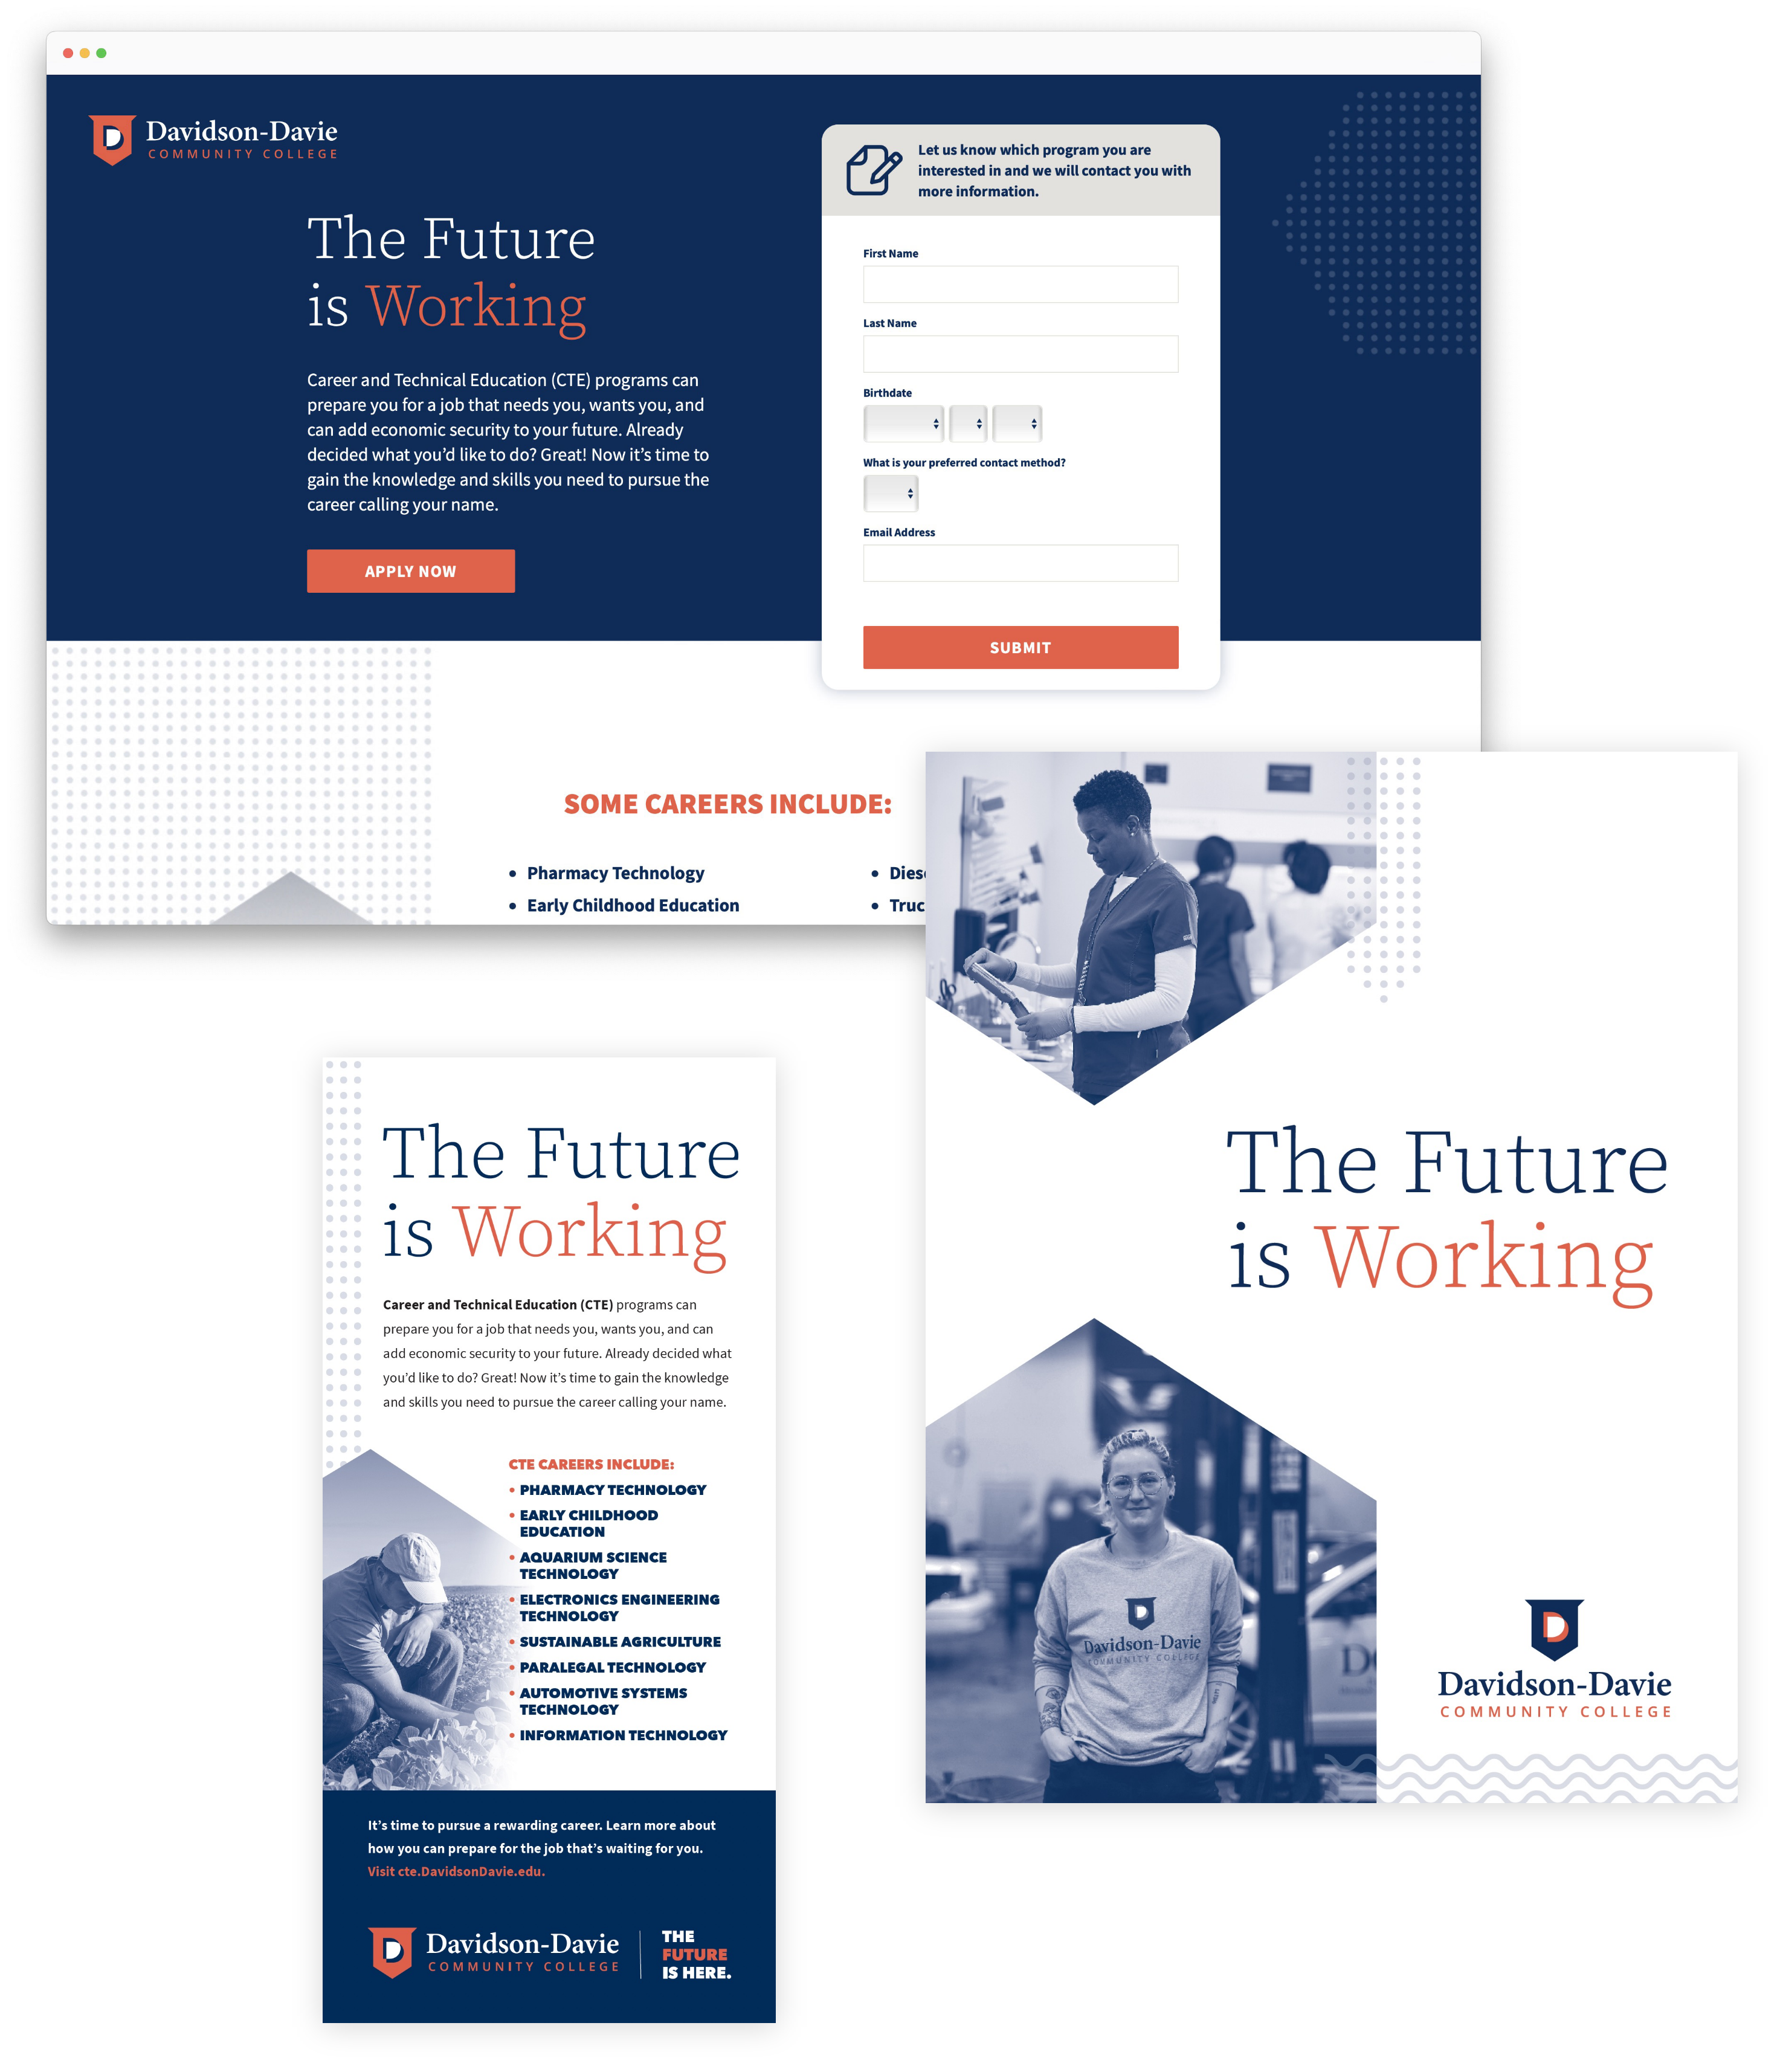 Picture of landing page, brochure cover, and rack card from "The Future is Working" campaign